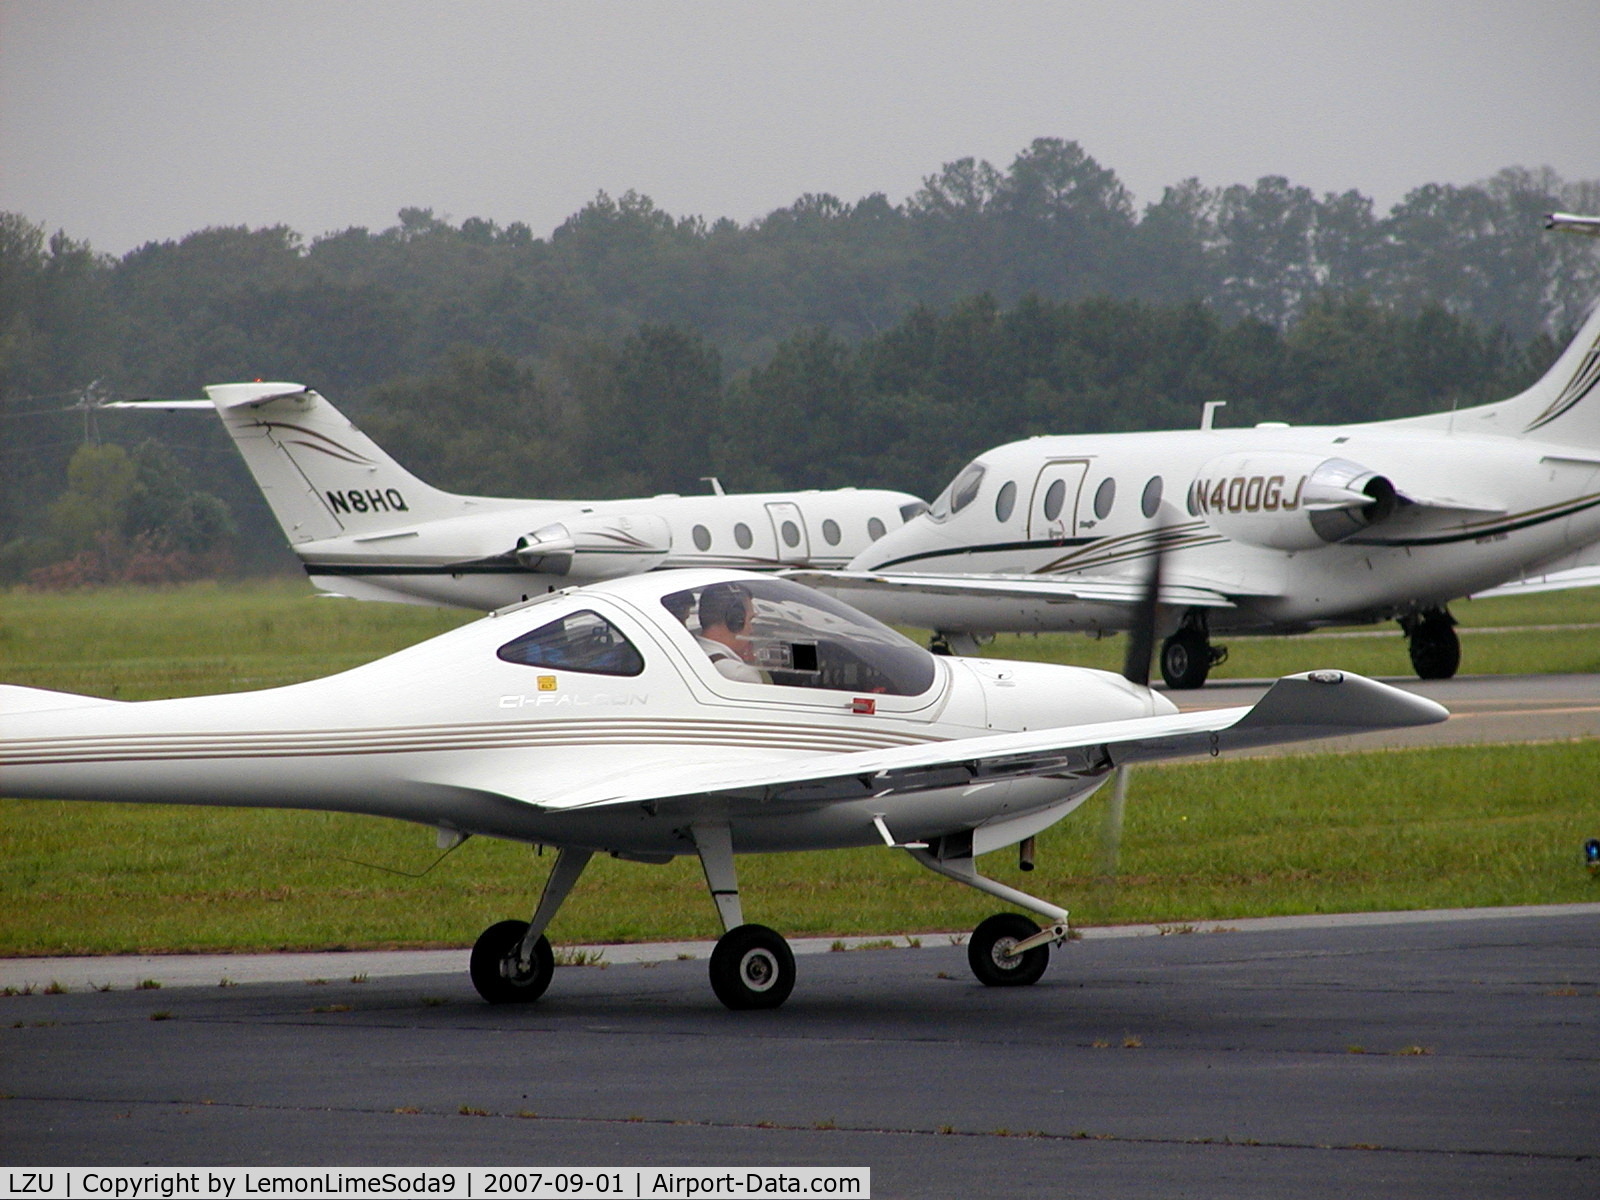 Gwinnett County - Briscoe Field Airport (LZU) - The airport was busy that day.